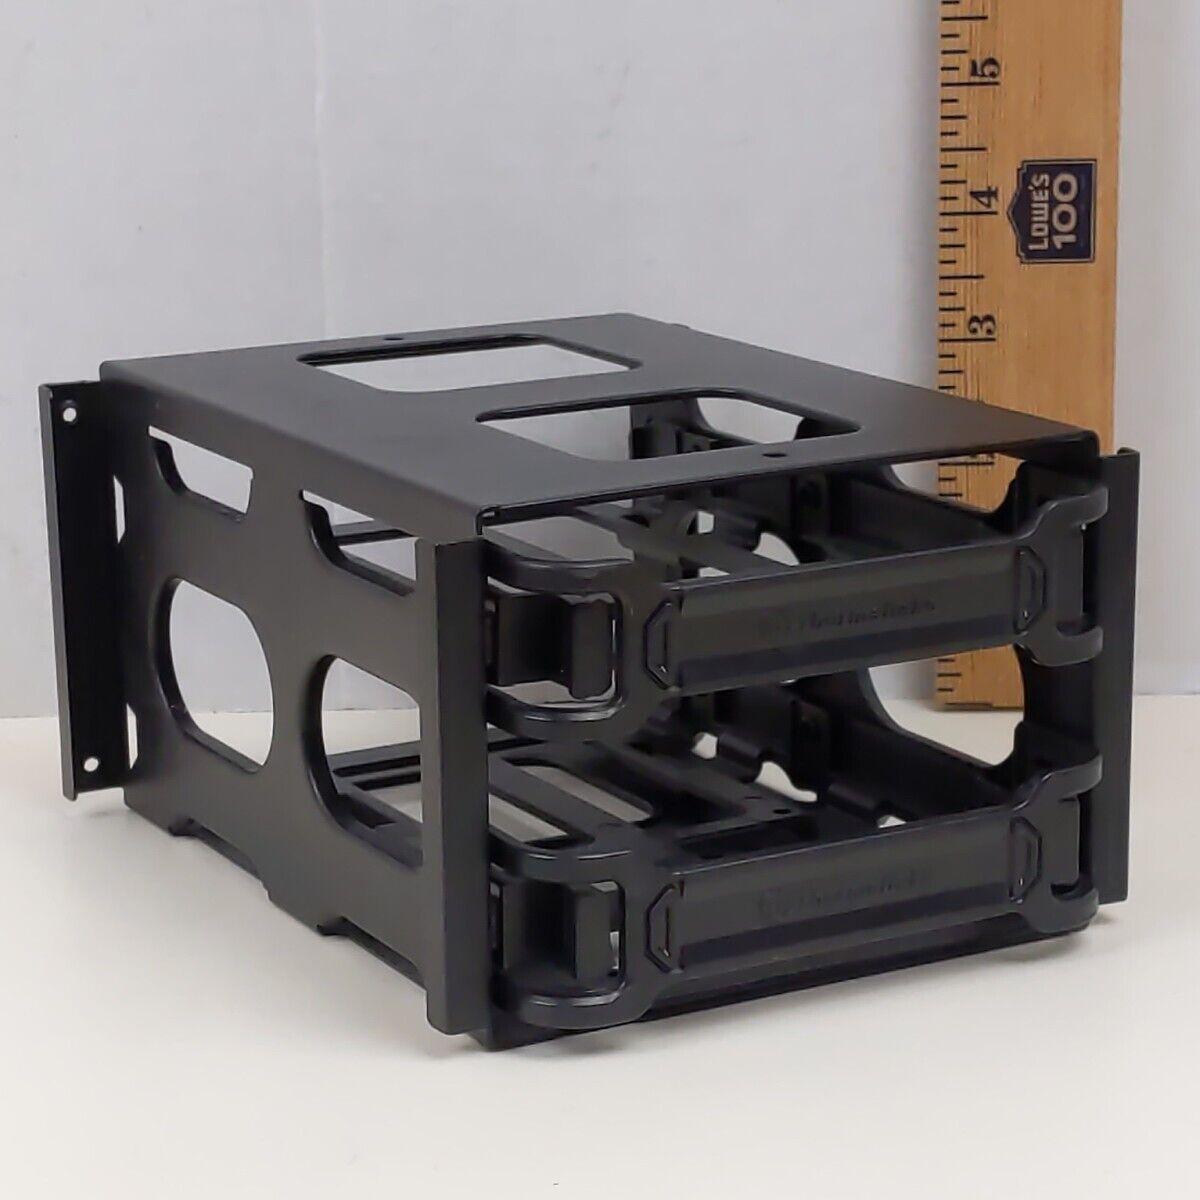 Thermaltake Hard Drive Cage Sleds HDD SSD Black ATX Case